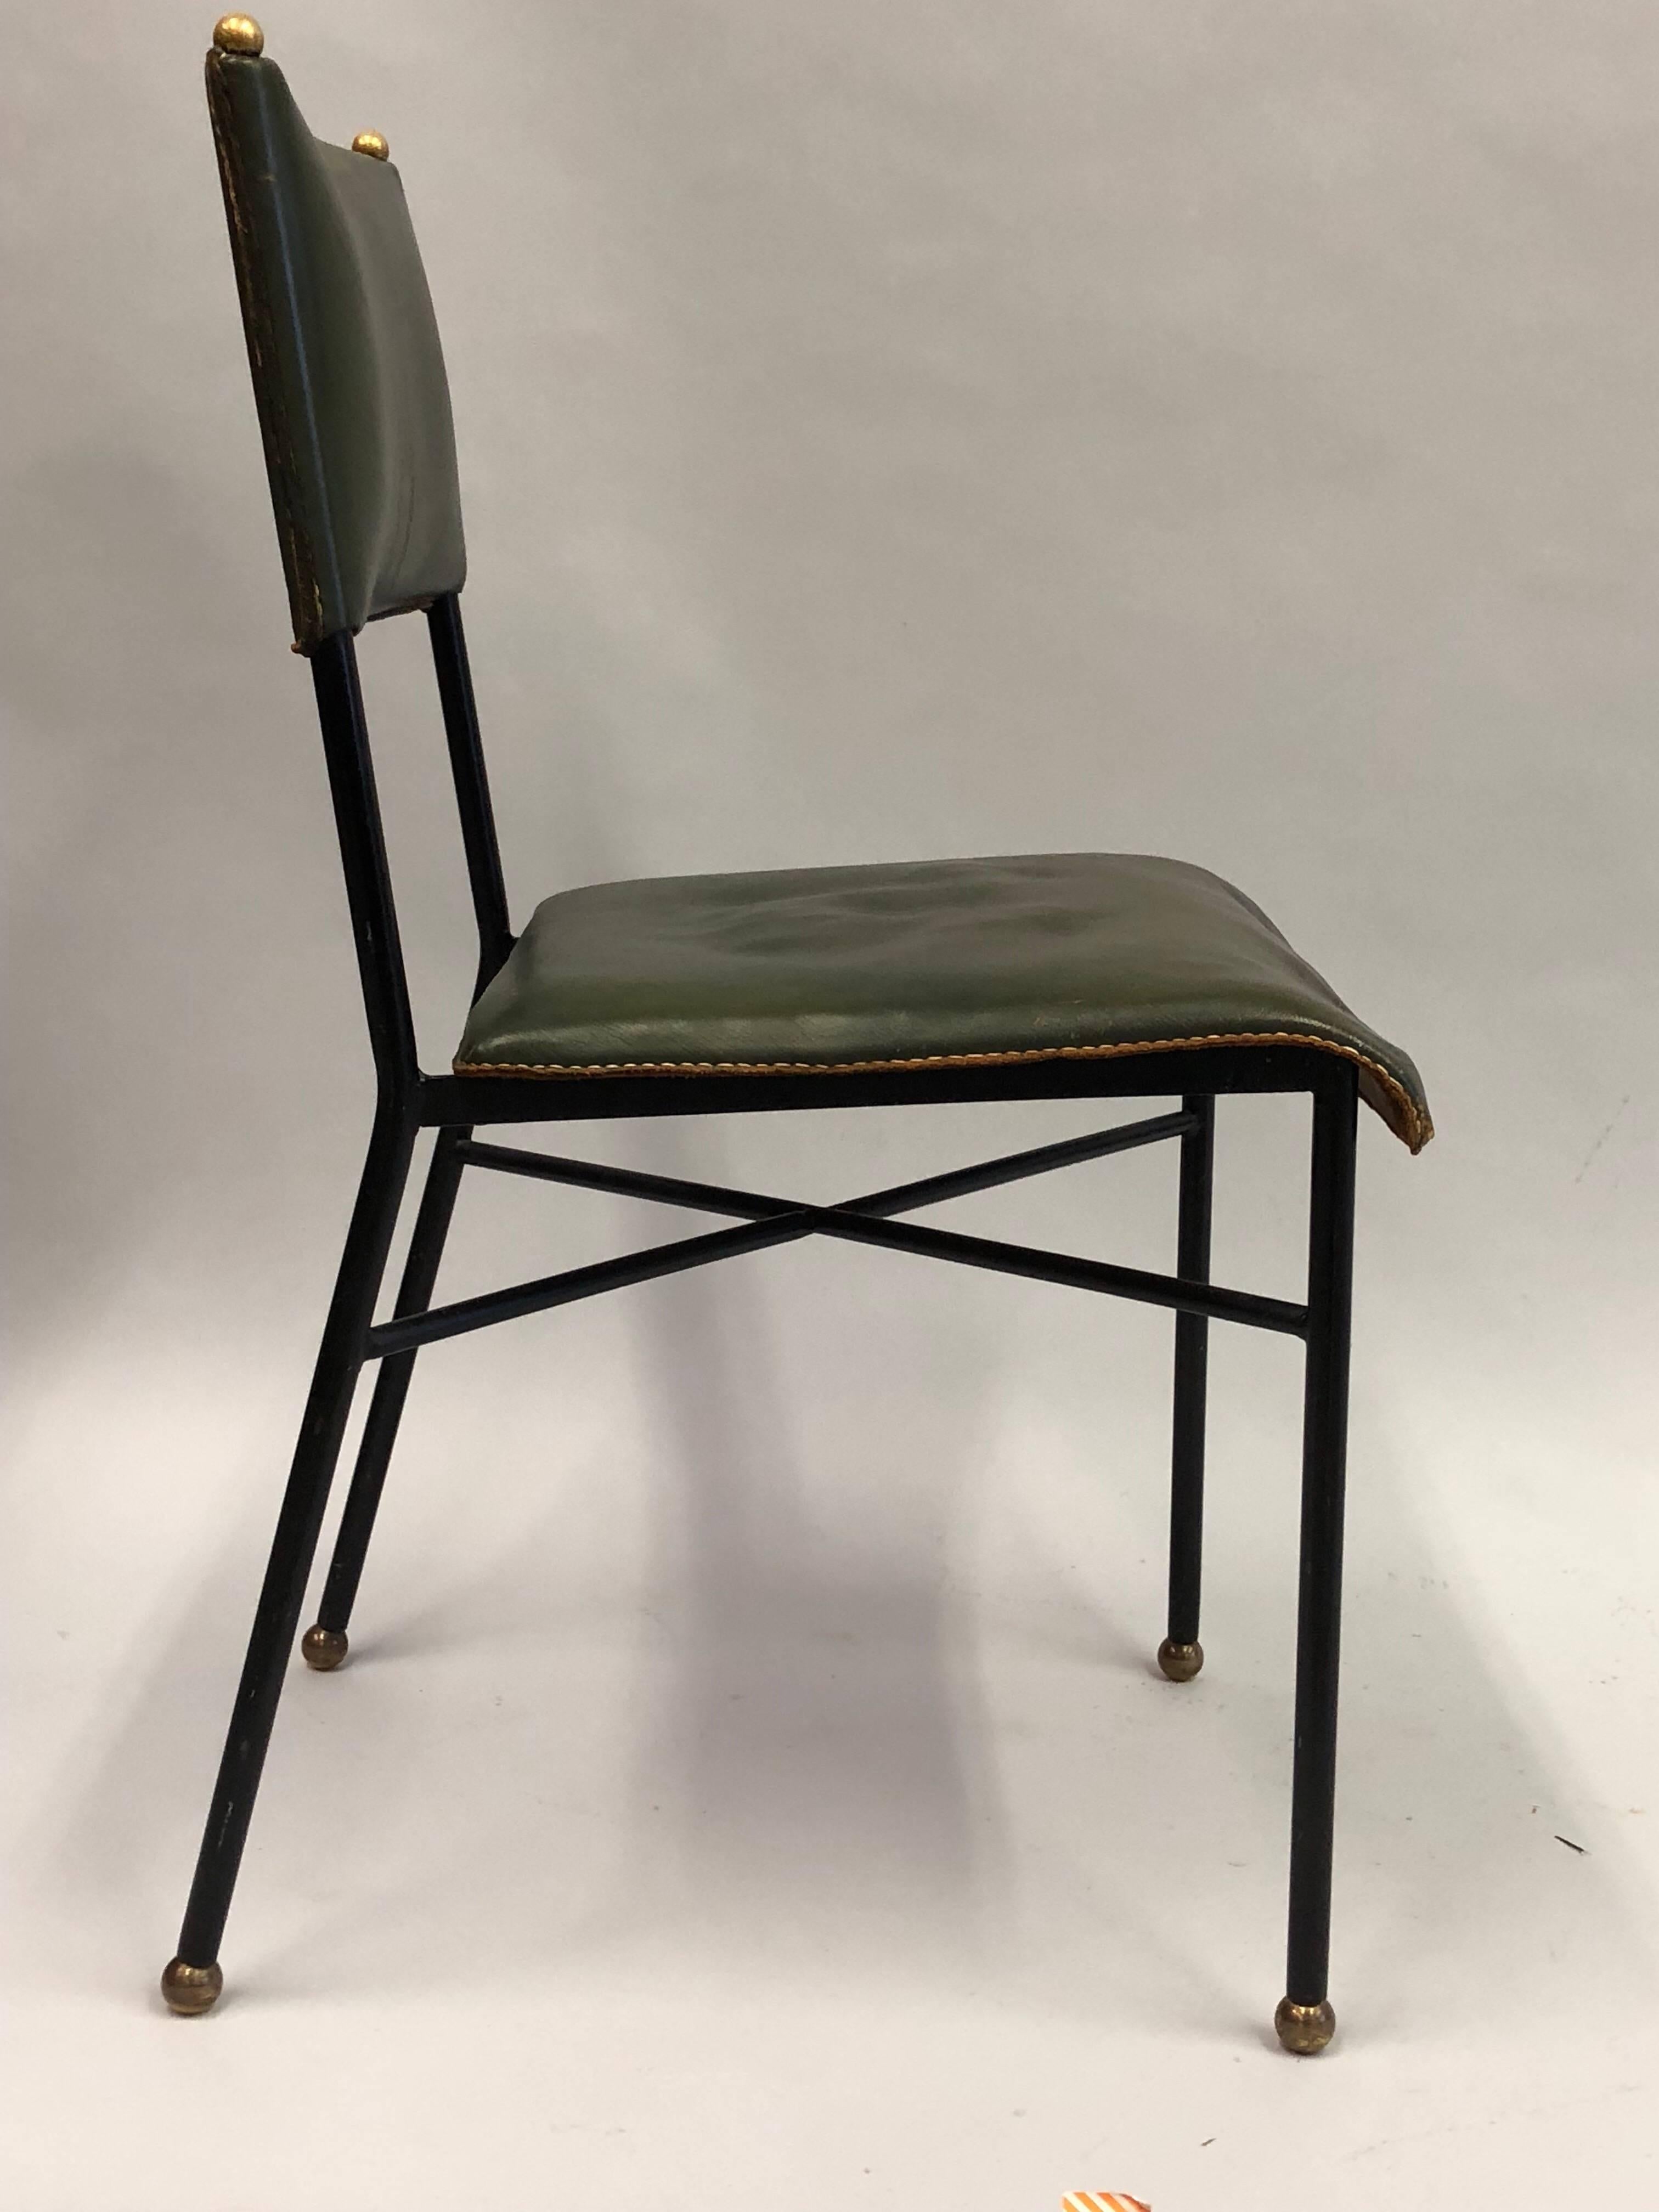 Enameled French Mid-Century Modern Hand-Stitched Leather Desk/Side Chair, Jacques Adnet